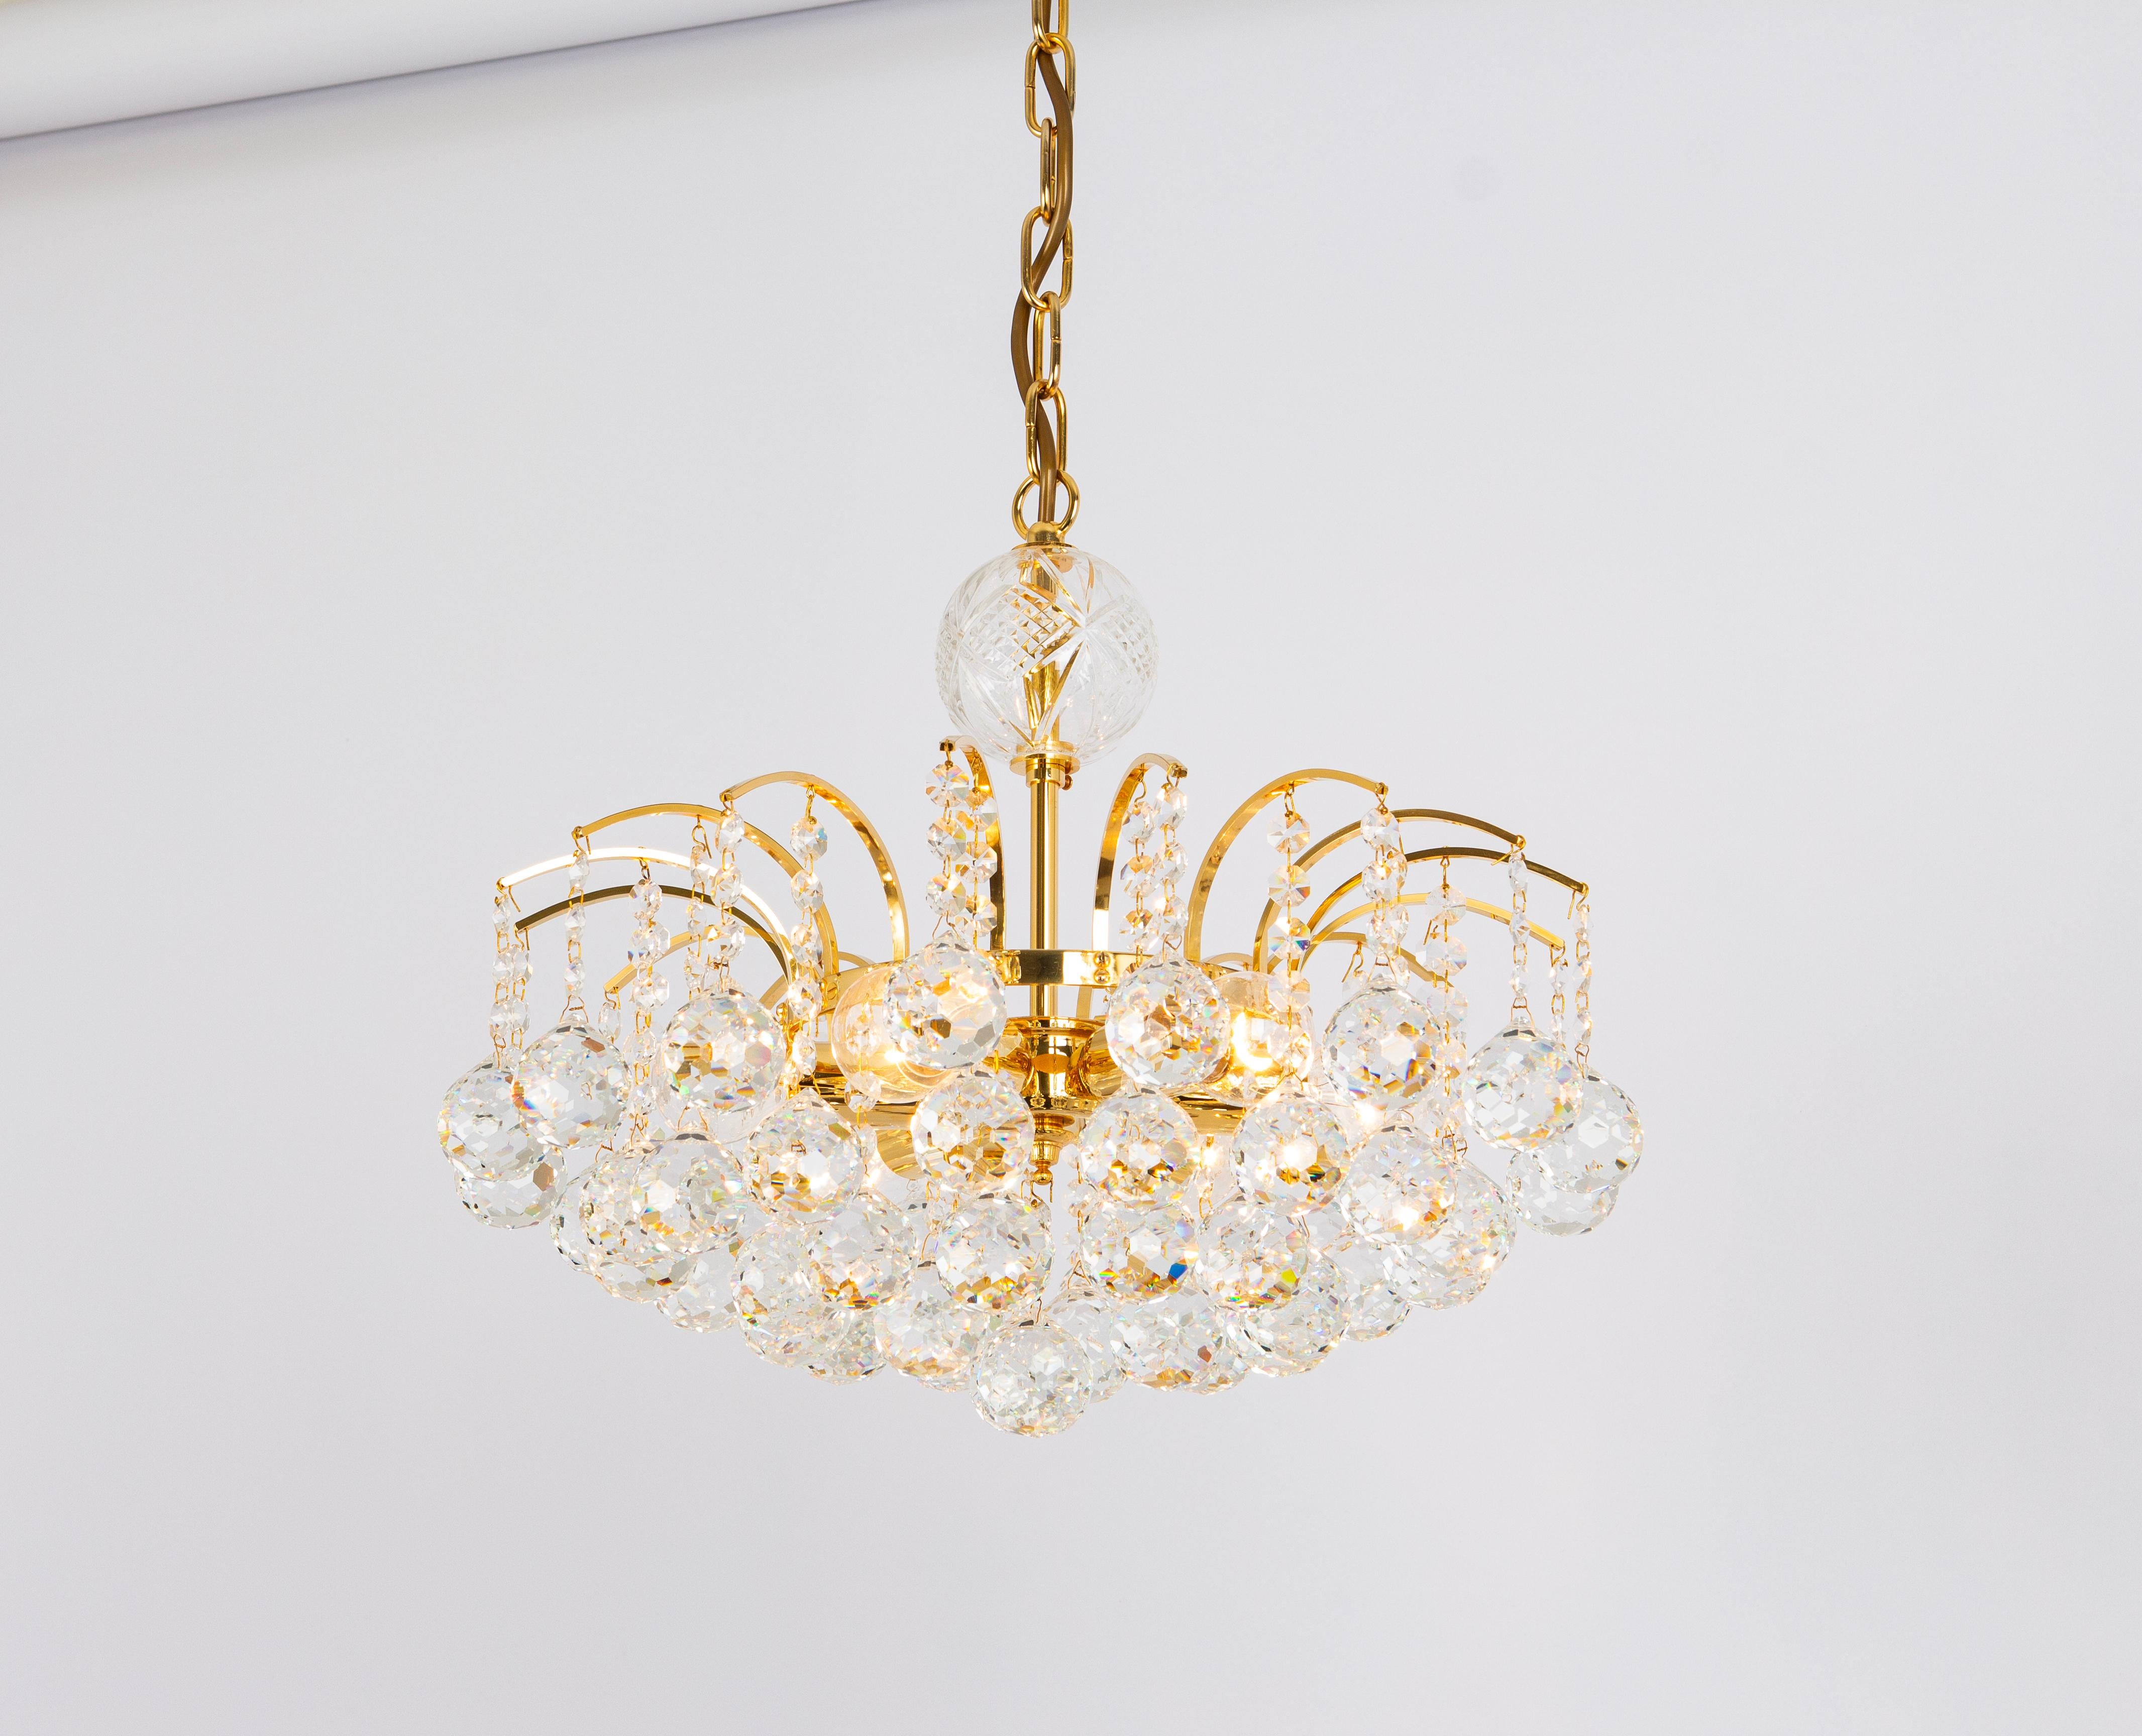 Brass Beautiful Petite Christoph Palme Chandelier Midcentury Crystal Balls, 1970s For Sale